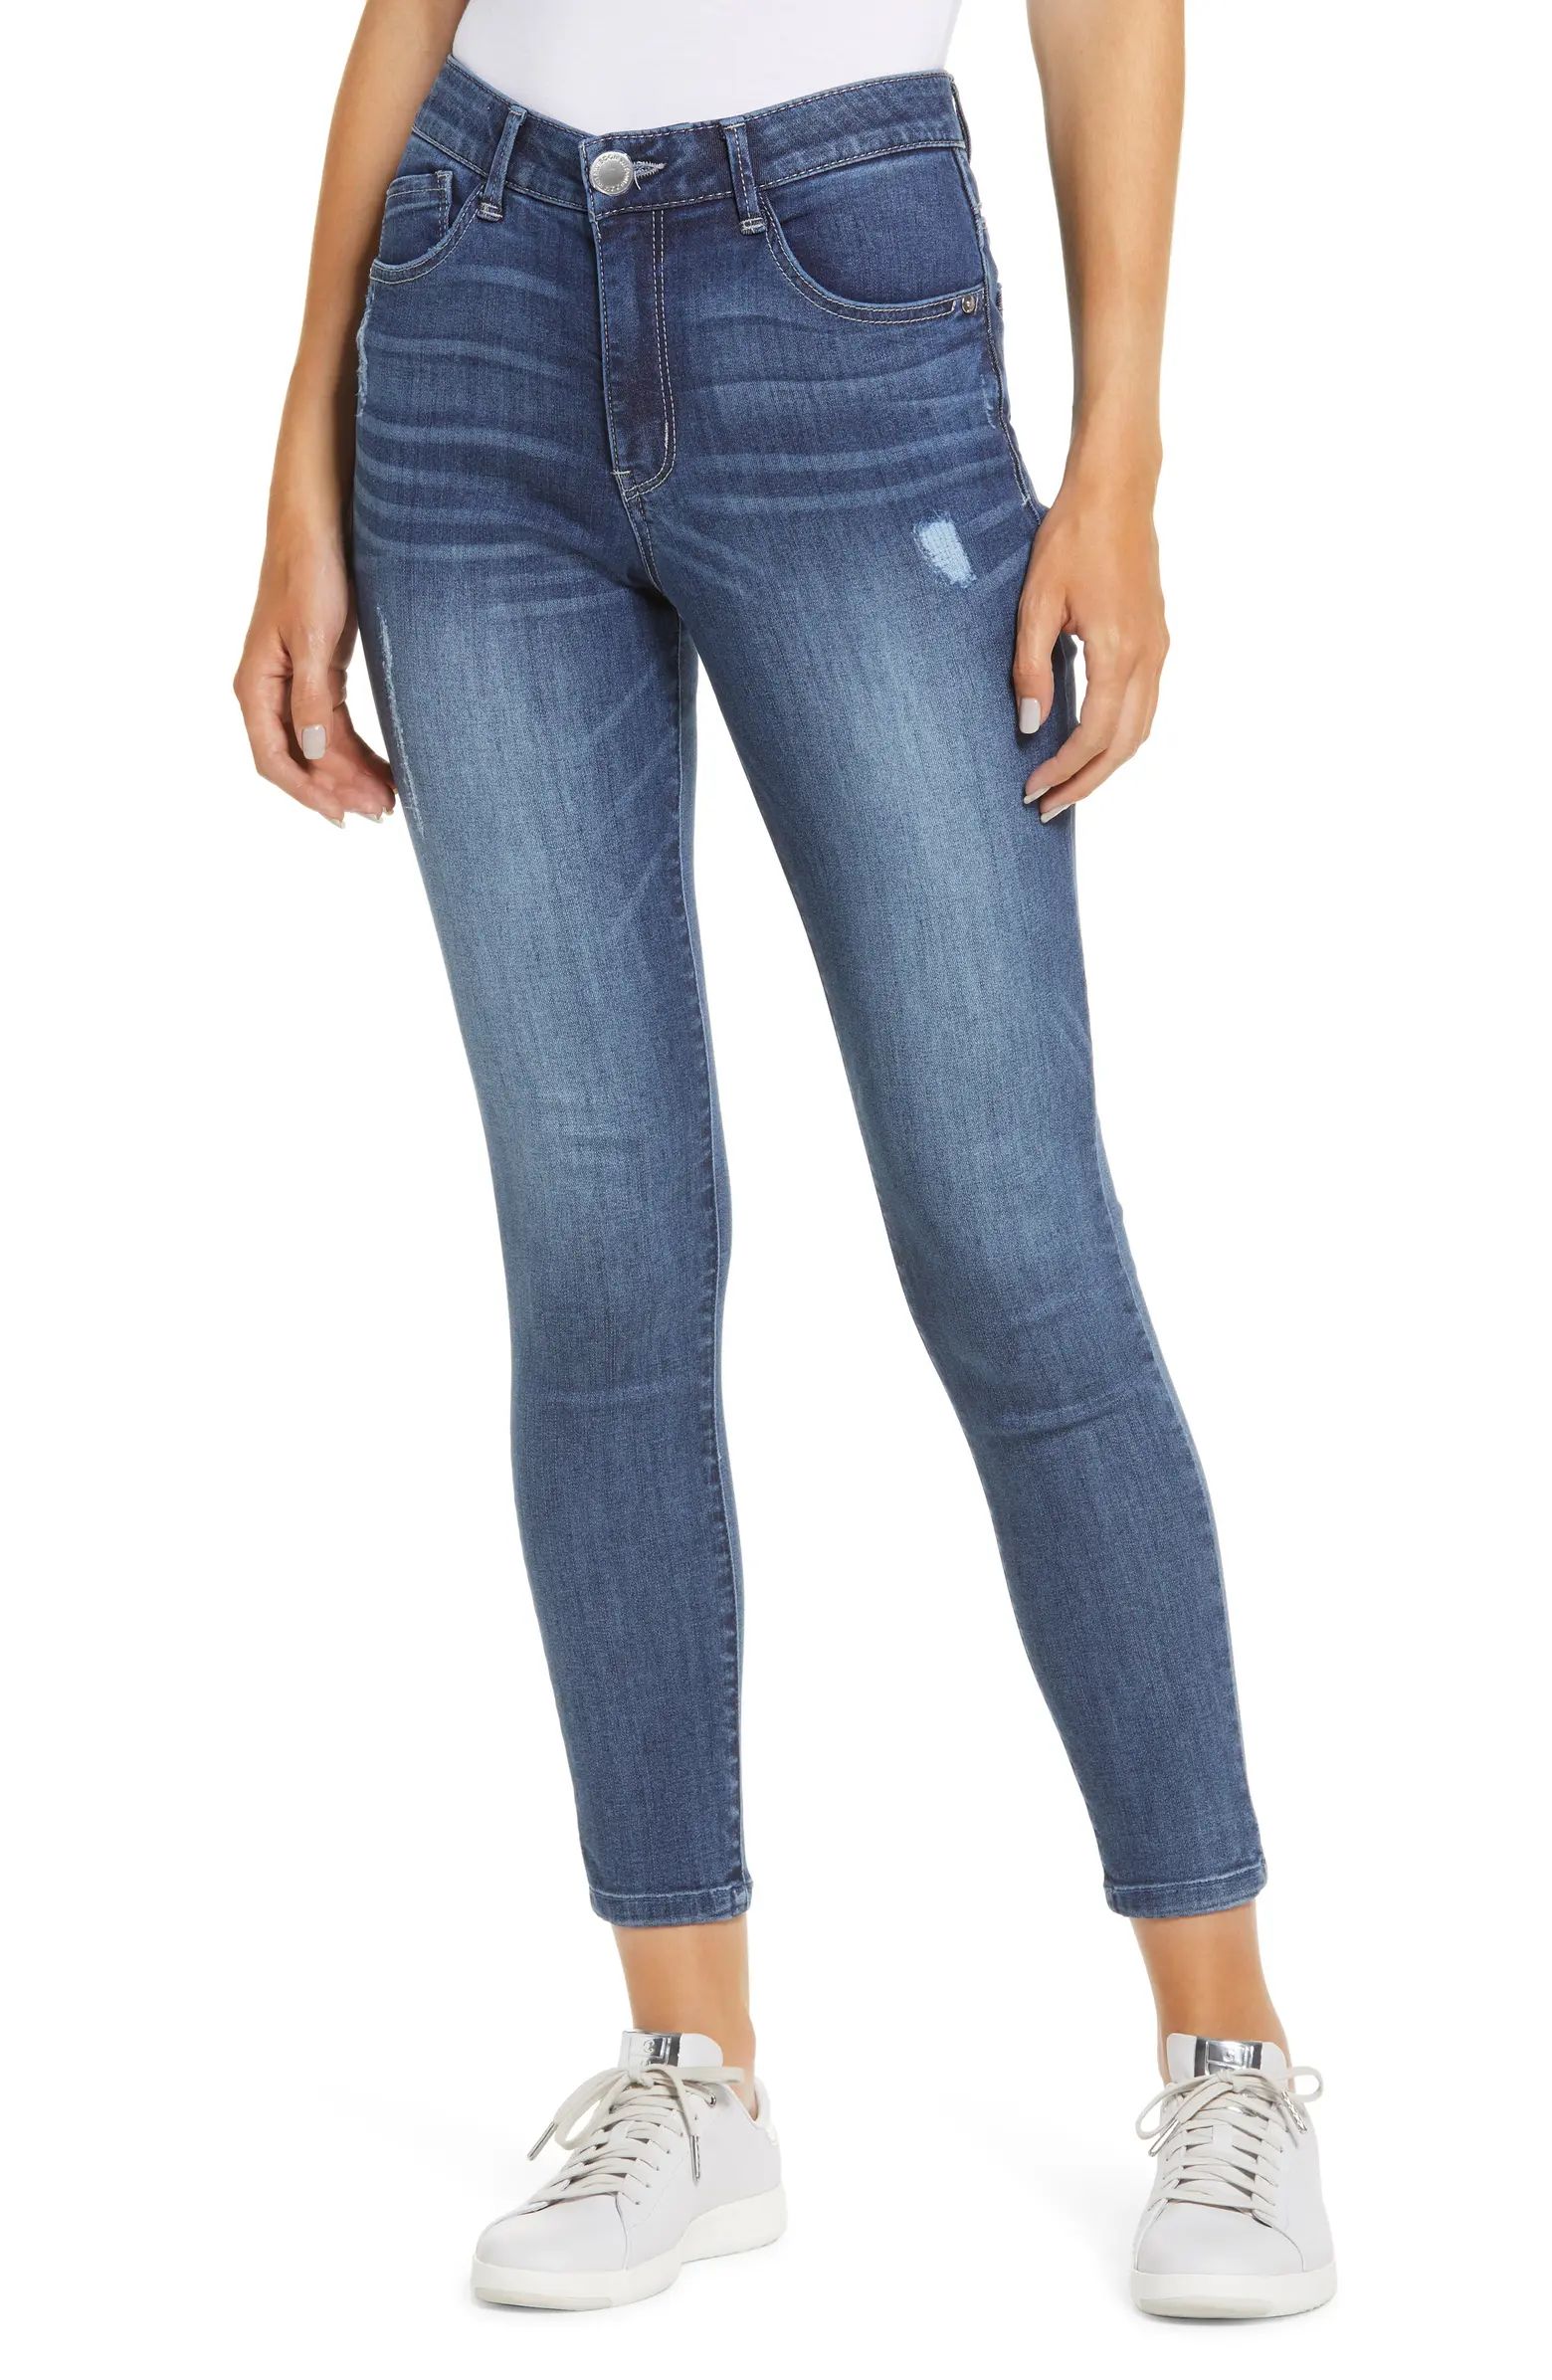 Wit & Wisdom Ab-Solution Luxe Touch High Waist Ankle Skinny Jeans | Nordstrom | Nordstrom